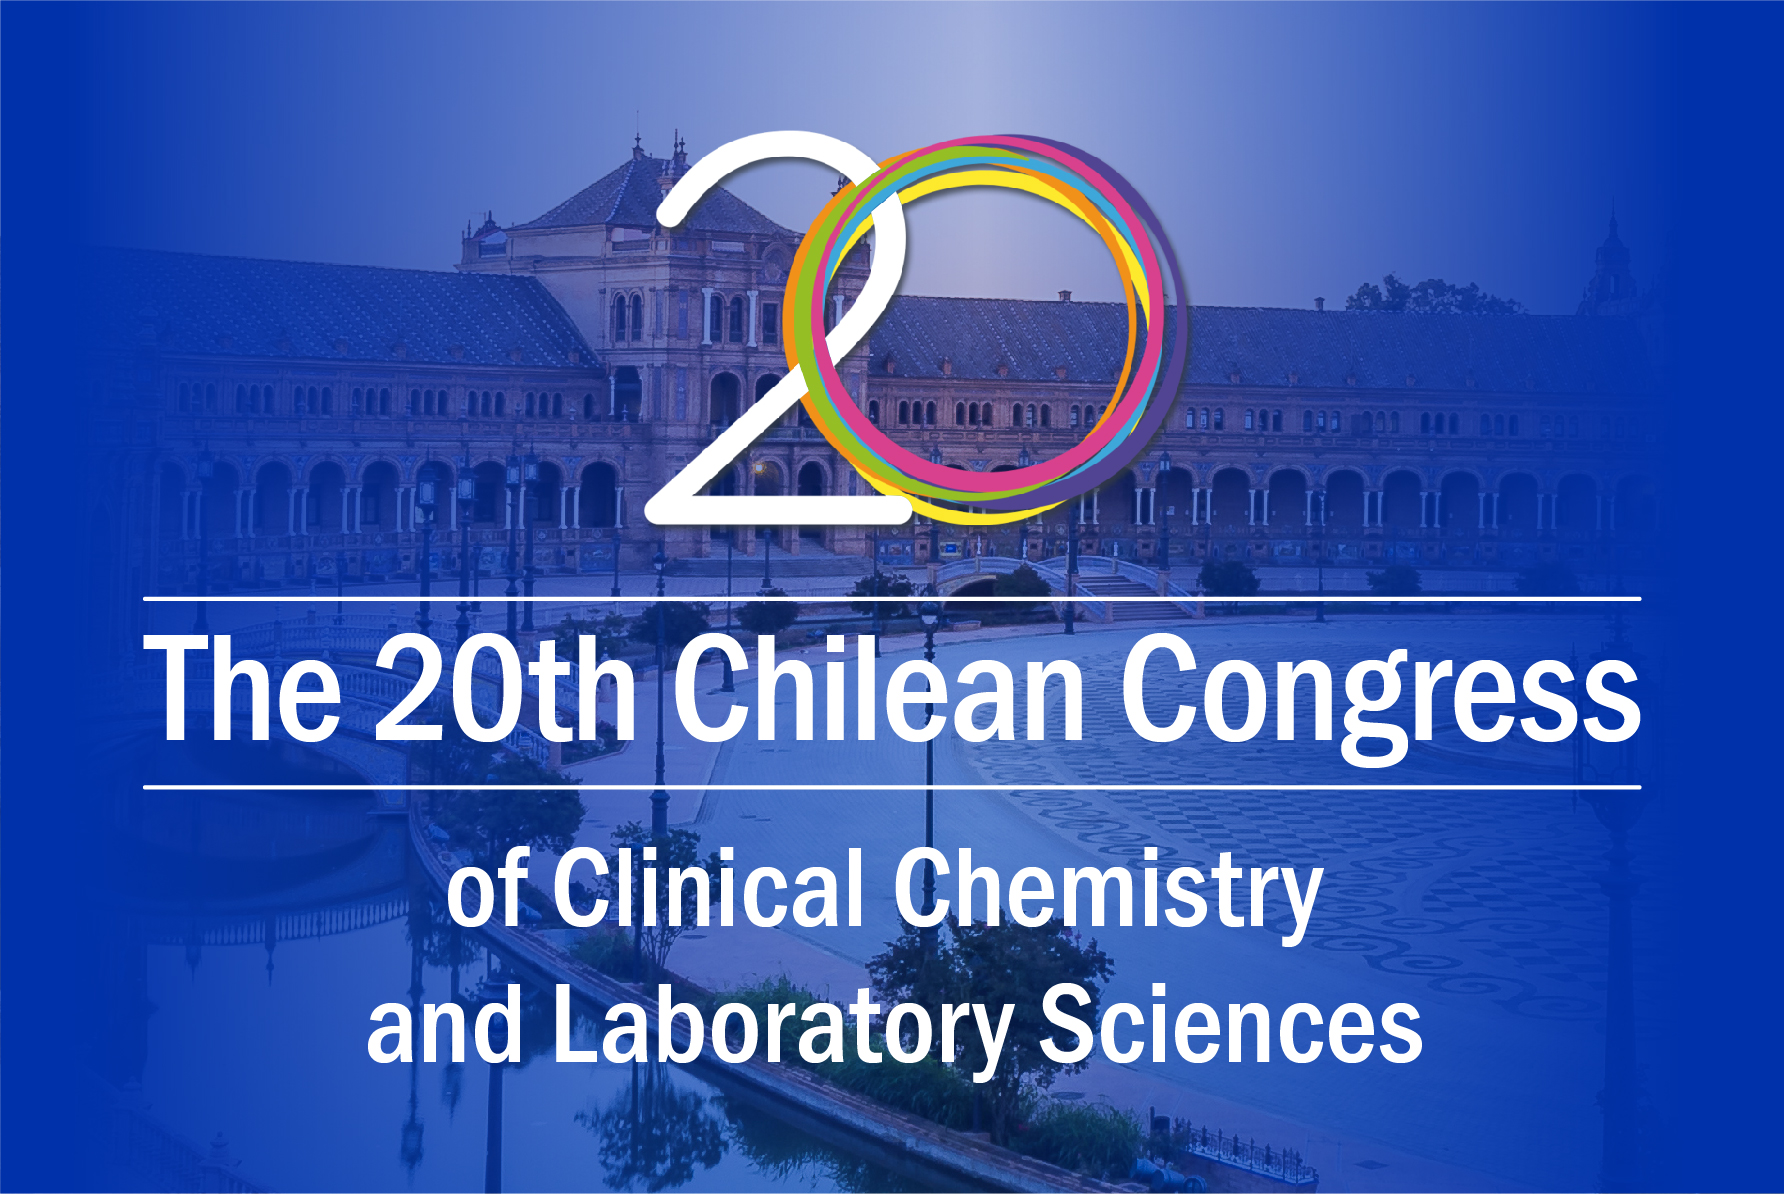 Igenesis’ Product Shined at the 20th Chilean Congress of Clinical Chemistry and Laboratory Science